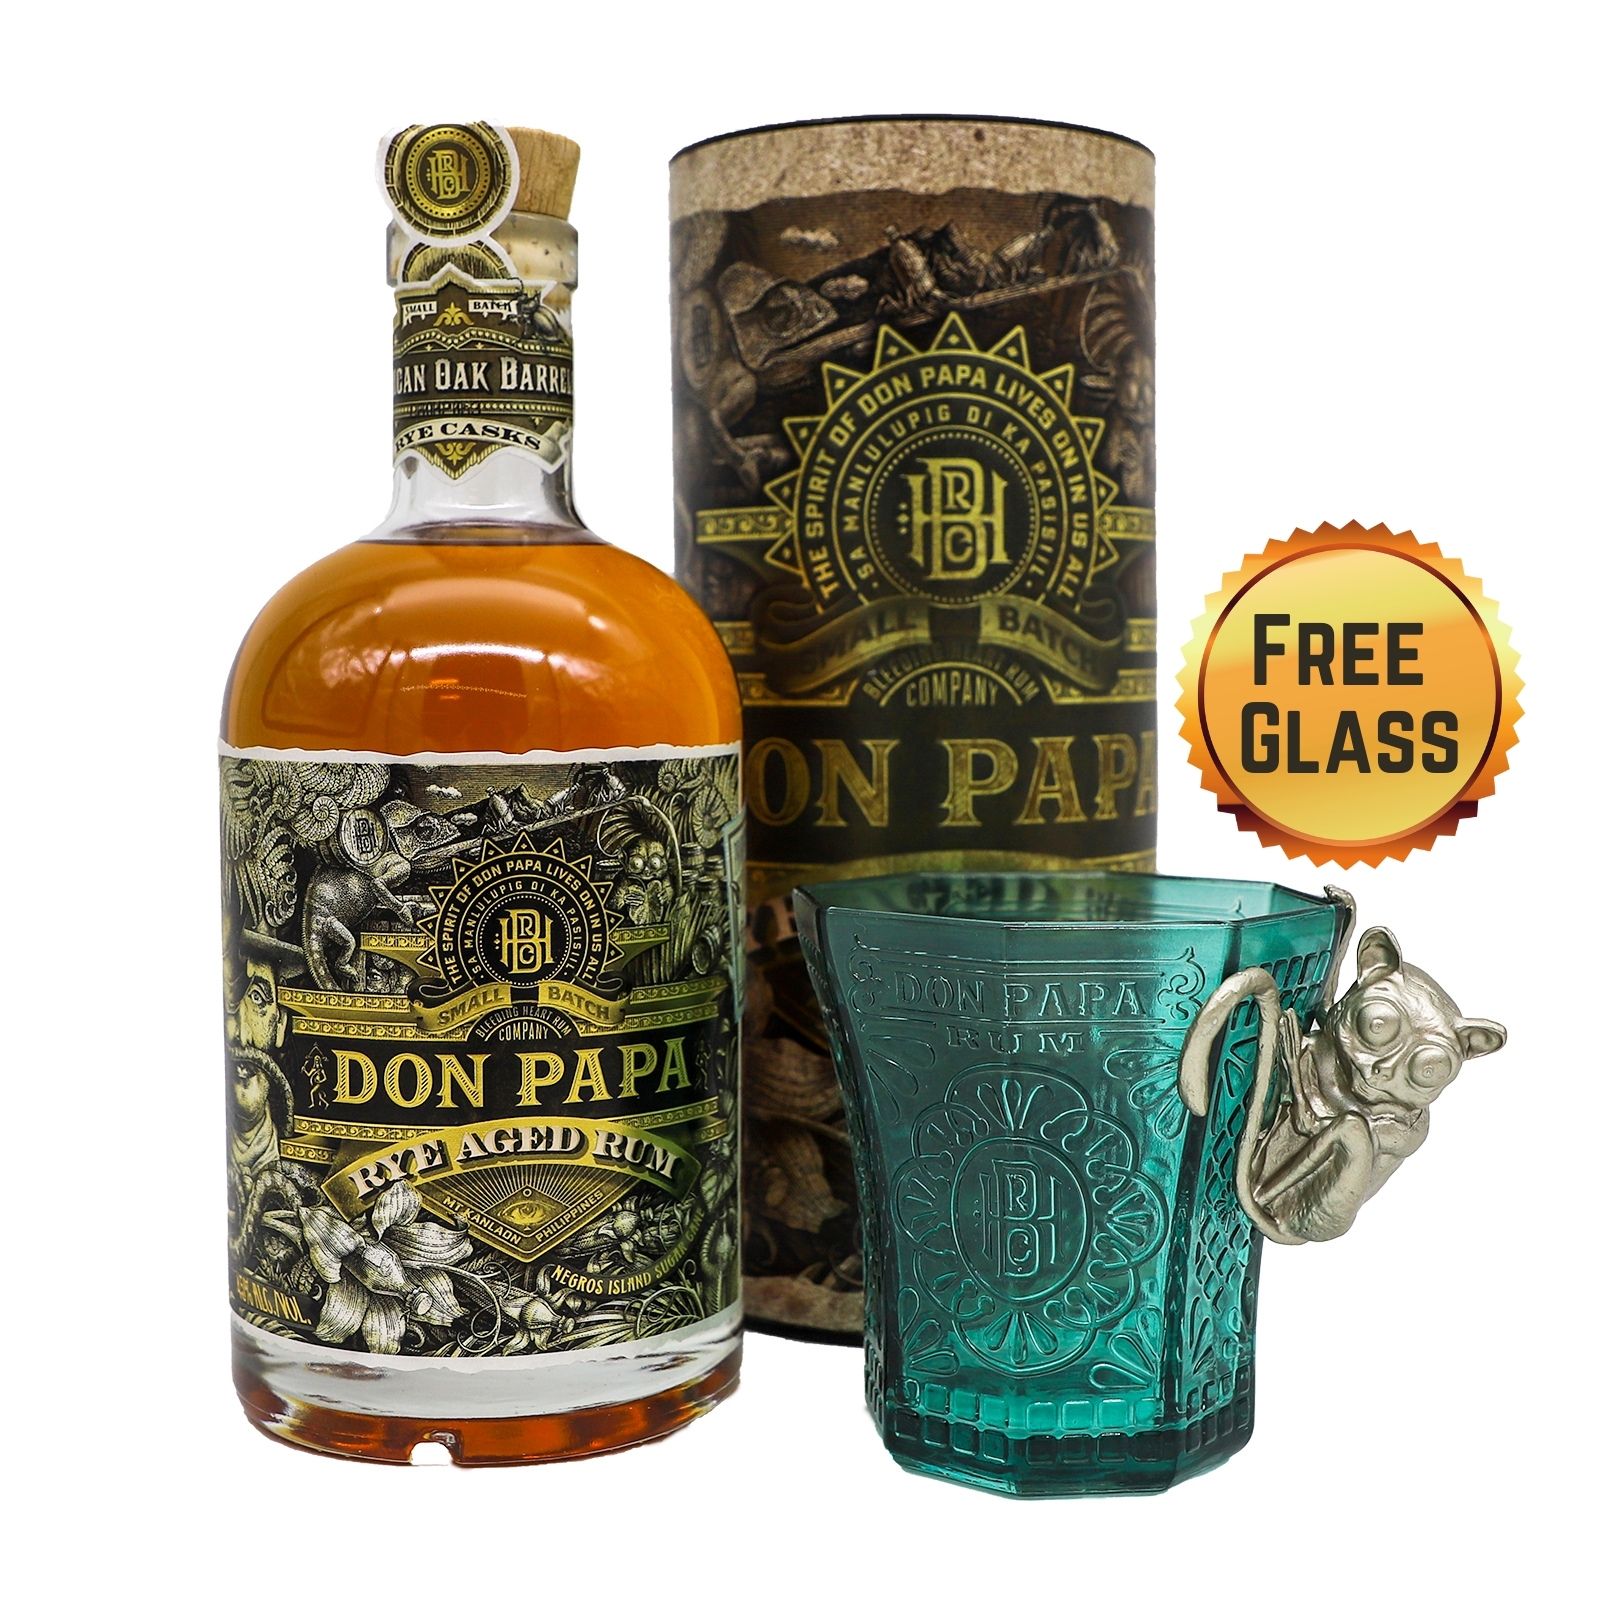 Don Papa Limited Edition Rye Cask Aged Rum 700ml with Free Tasier Glass